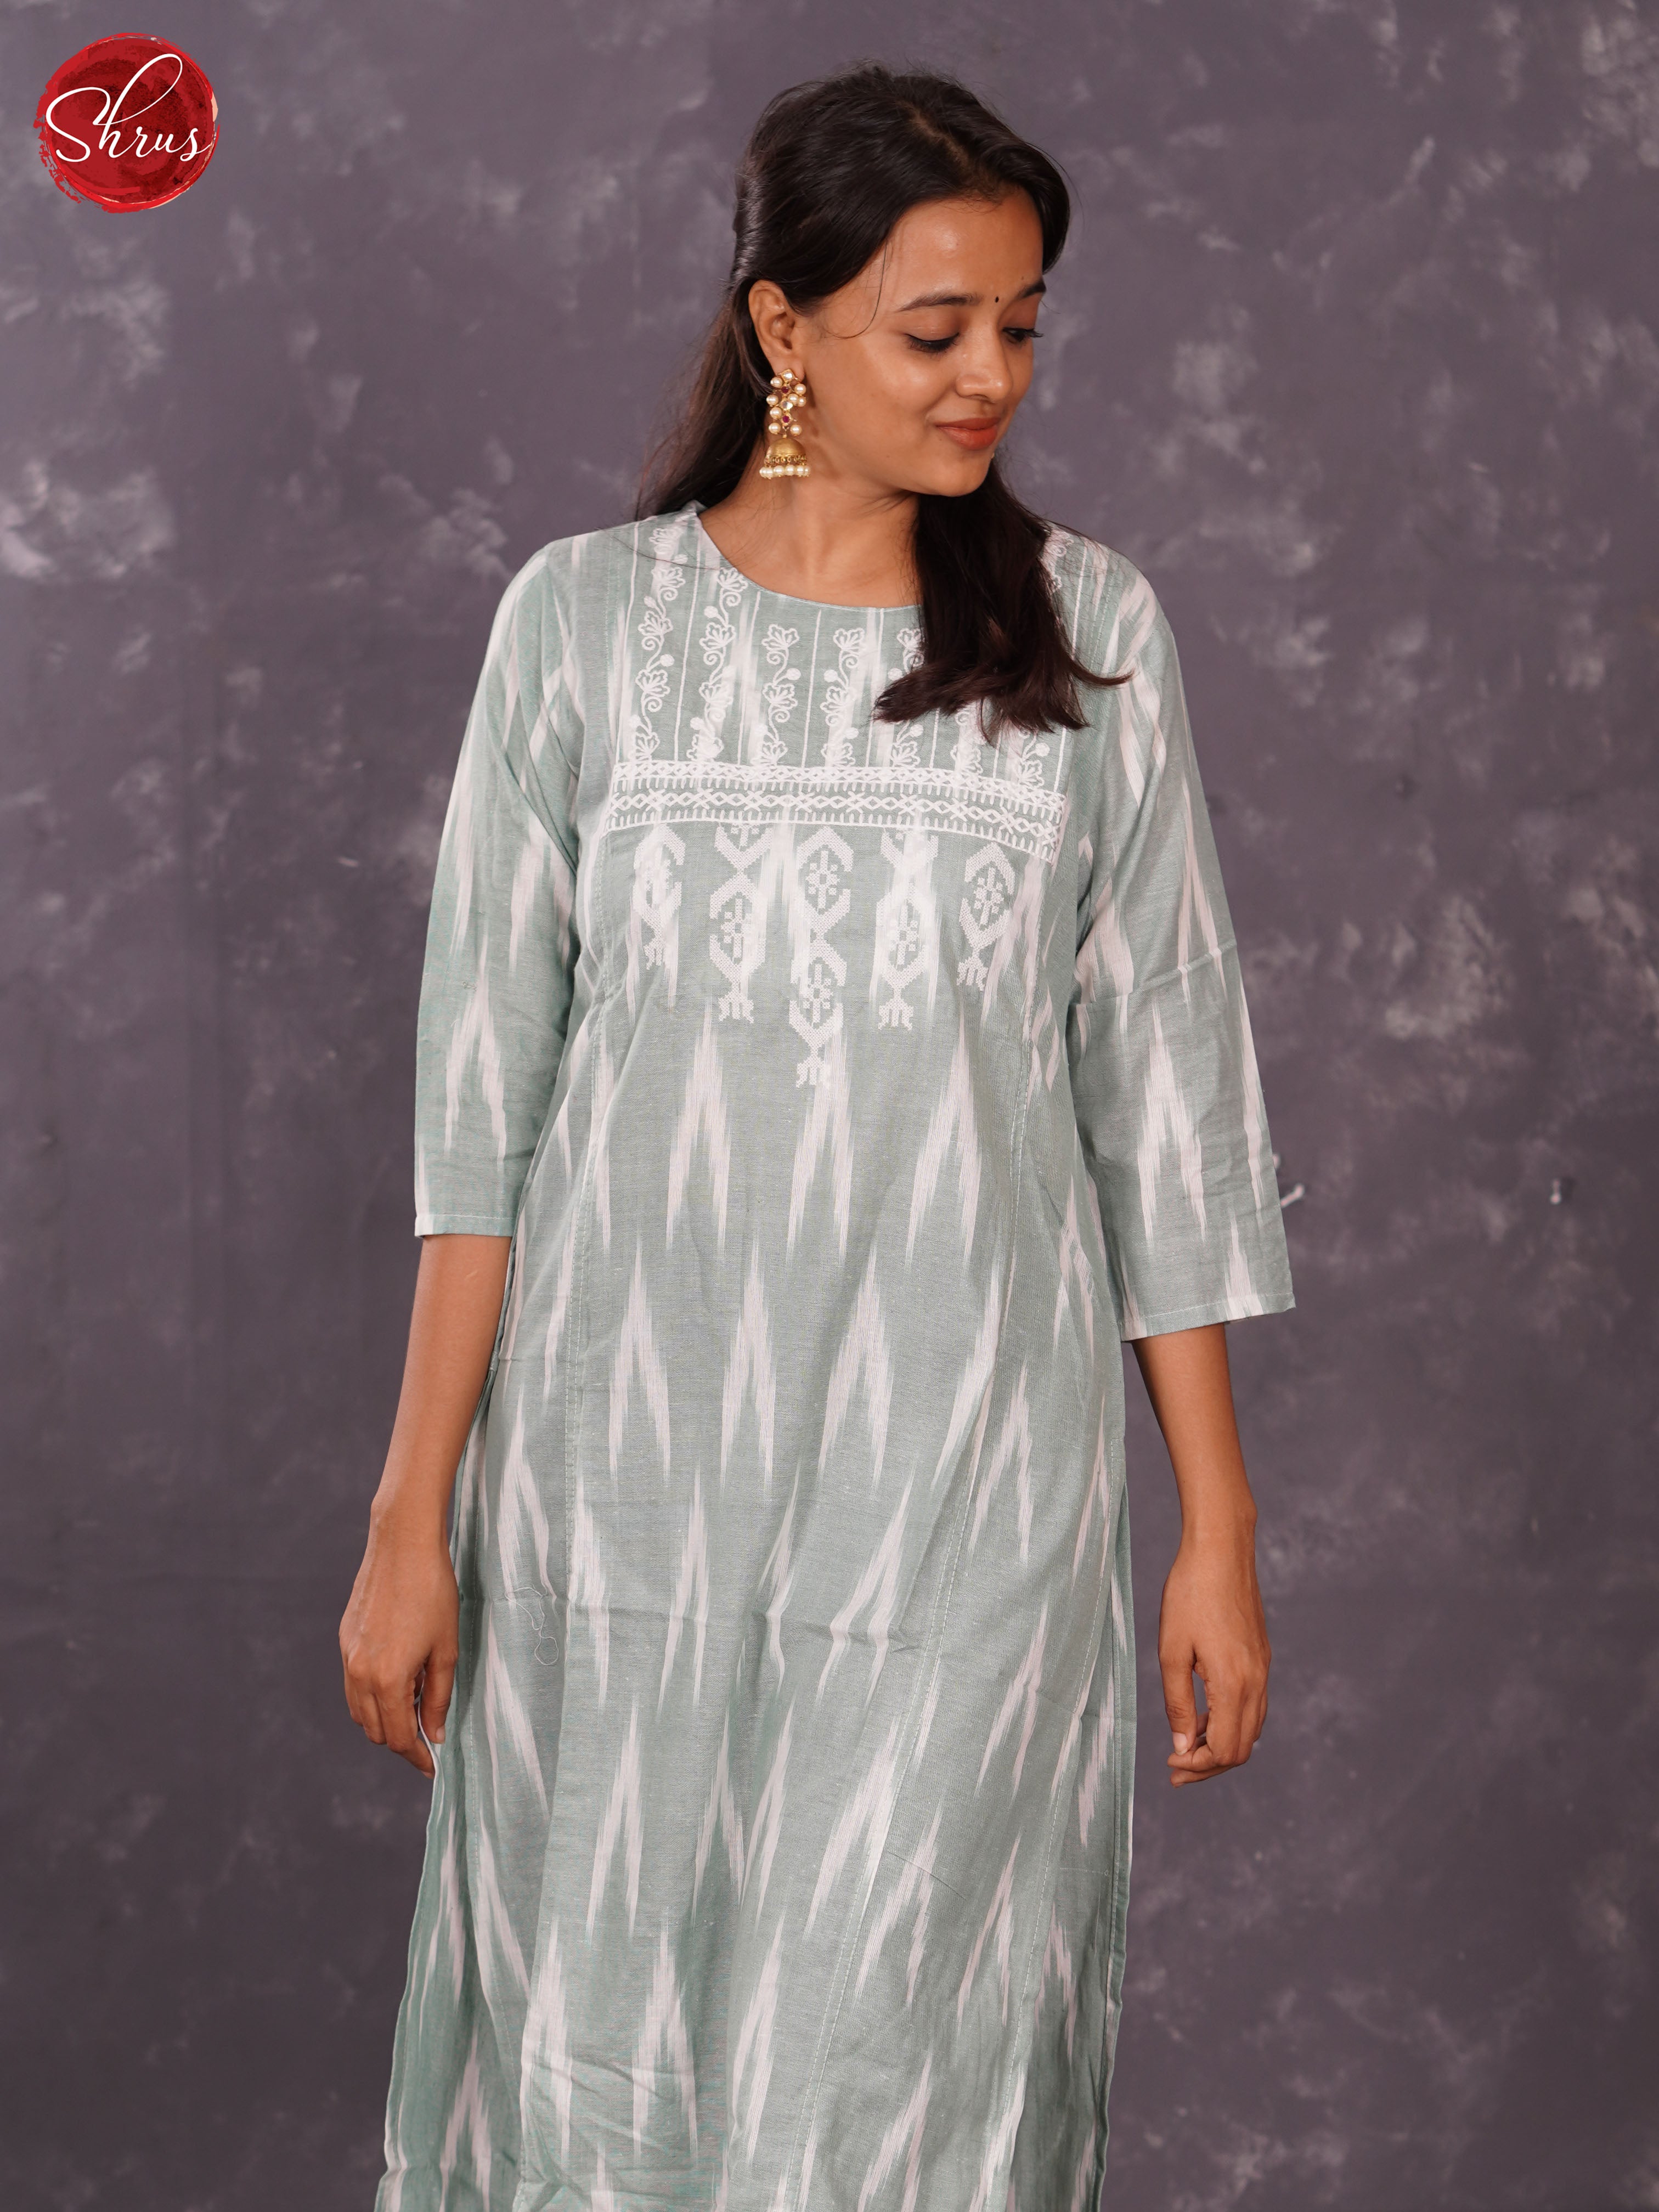 Grey - Ikkat Printed Cotton straight Readymade Kurti with embroidery in the neck - Shop on ShrusEternity.com